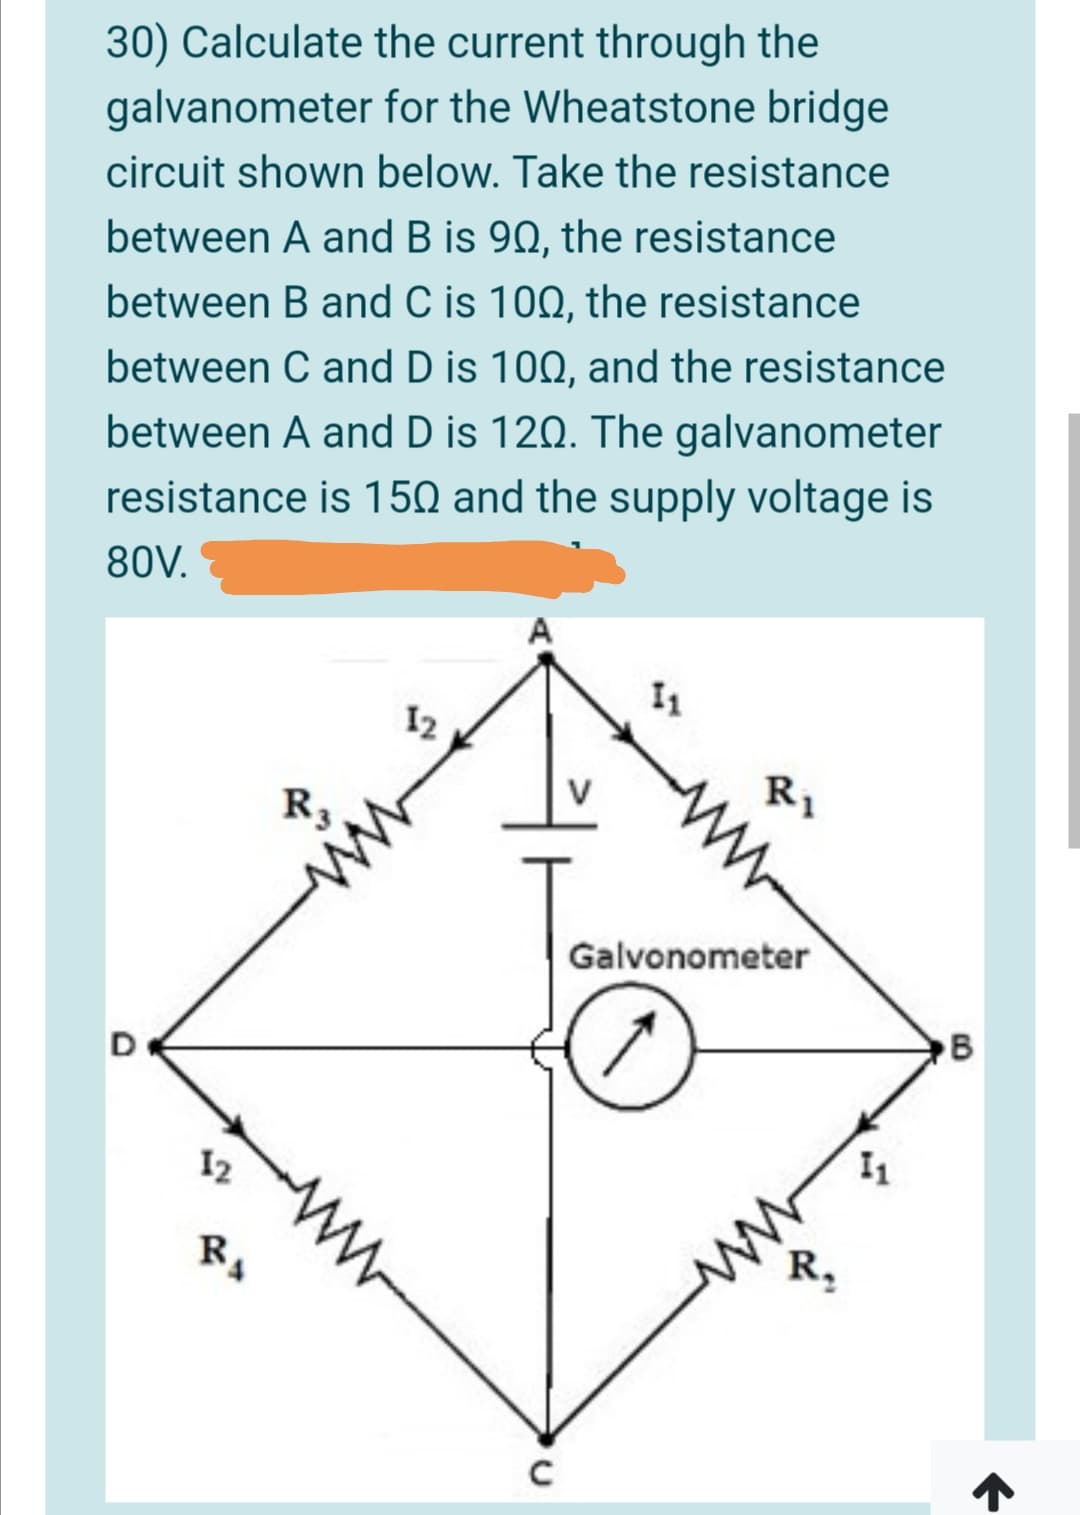 30) Calculate the current through the
galvanometer for the Wheatstone bridge
circuit shown below. Take the resistance
between A and B is 90, the resistance
between B and C is 100, the resistance
between C and D is 100, and the resistance
between A and D is 120. The galvanometer
resistance is 150 and the supply voltage is
80V.
A
I1
I2
R1
R3
Galvonometer
B
12
W-
ww
